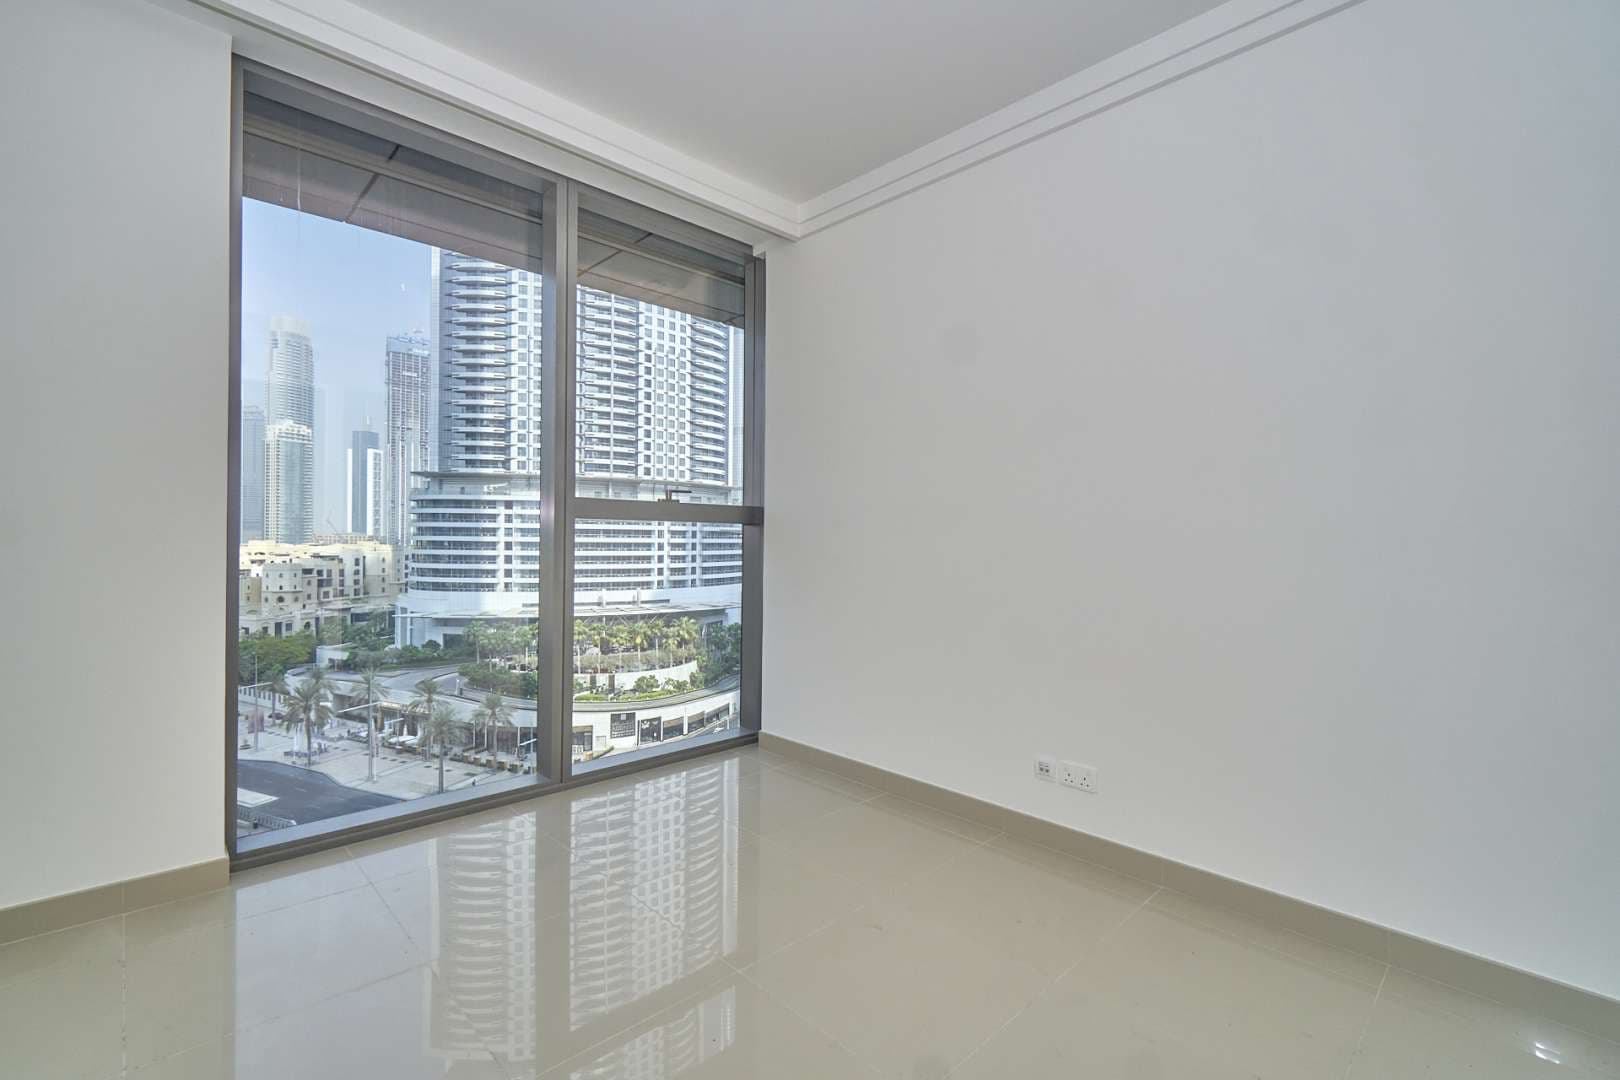 1 Bedroom Apartment For Sale Boulevard Point Lp08217 Aa9992f59bb4800.jpg